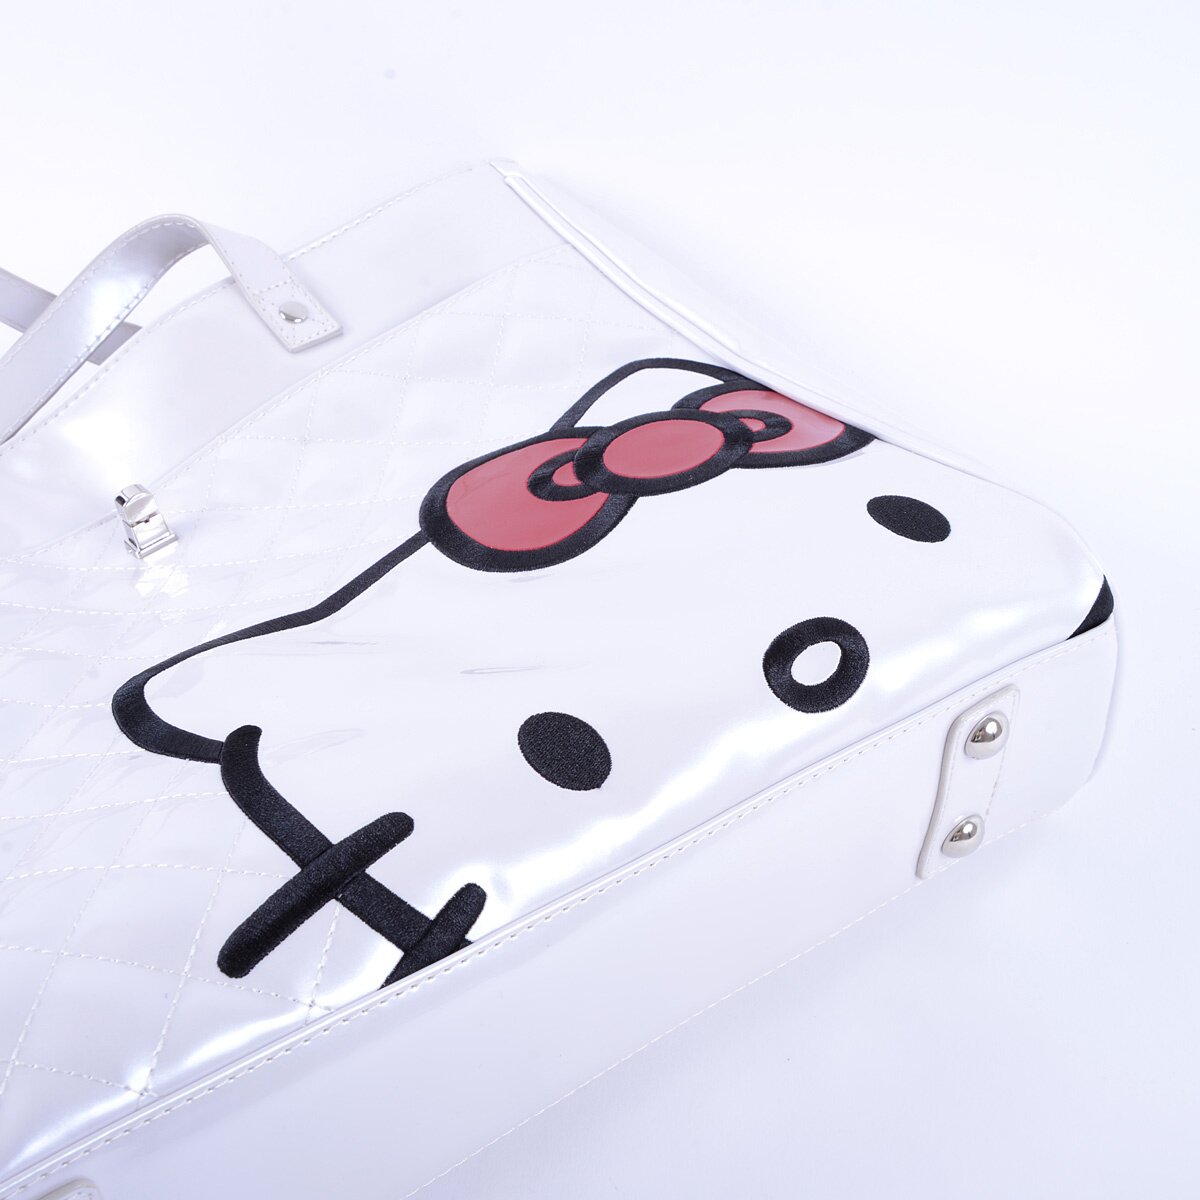 Hello Kitty Face Quilted Bag (white / red / black)